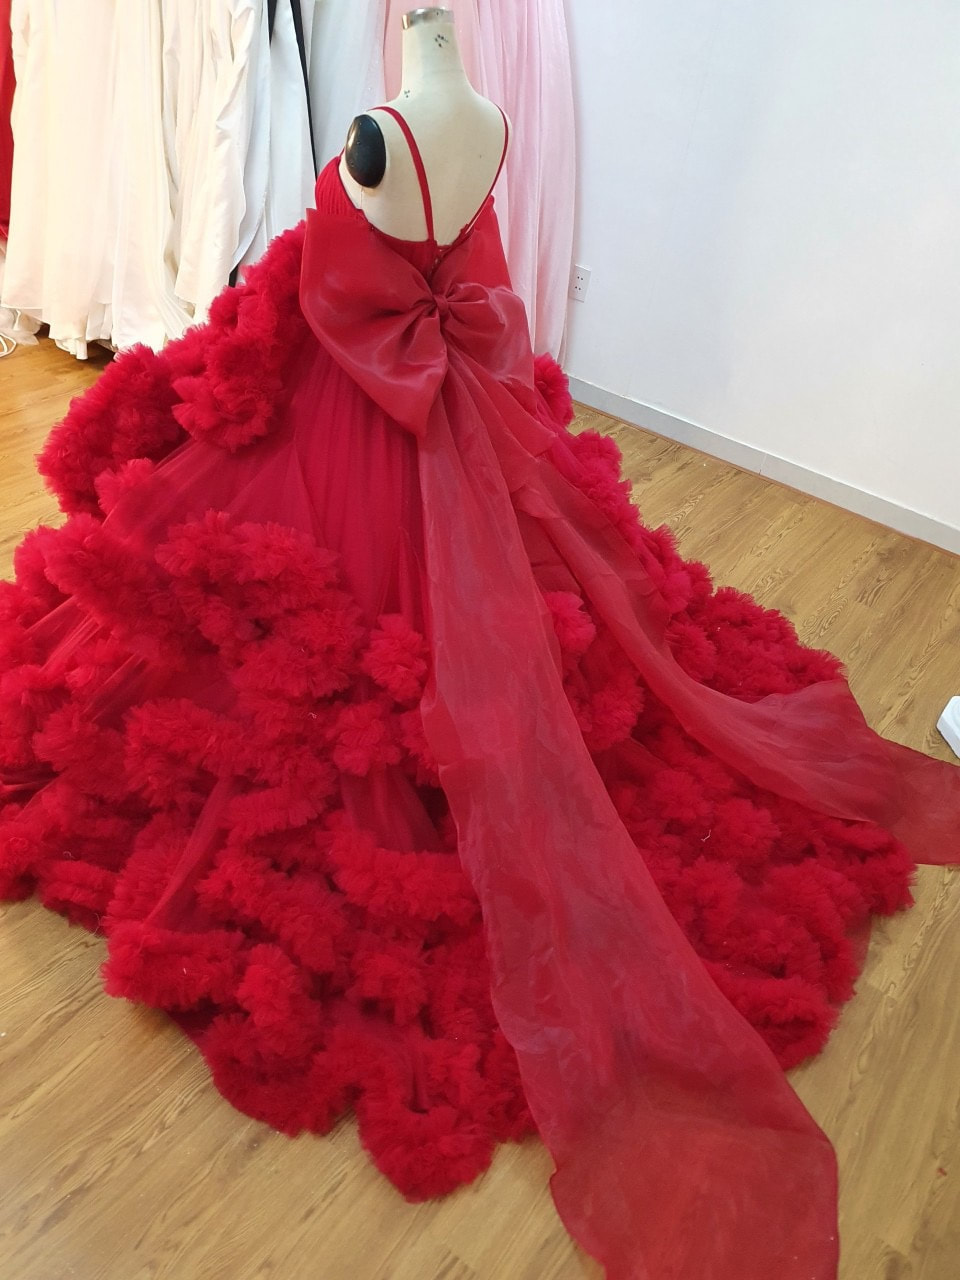 Red poofy flounce tiered ruffled skirt sweetheart neck tulle ball